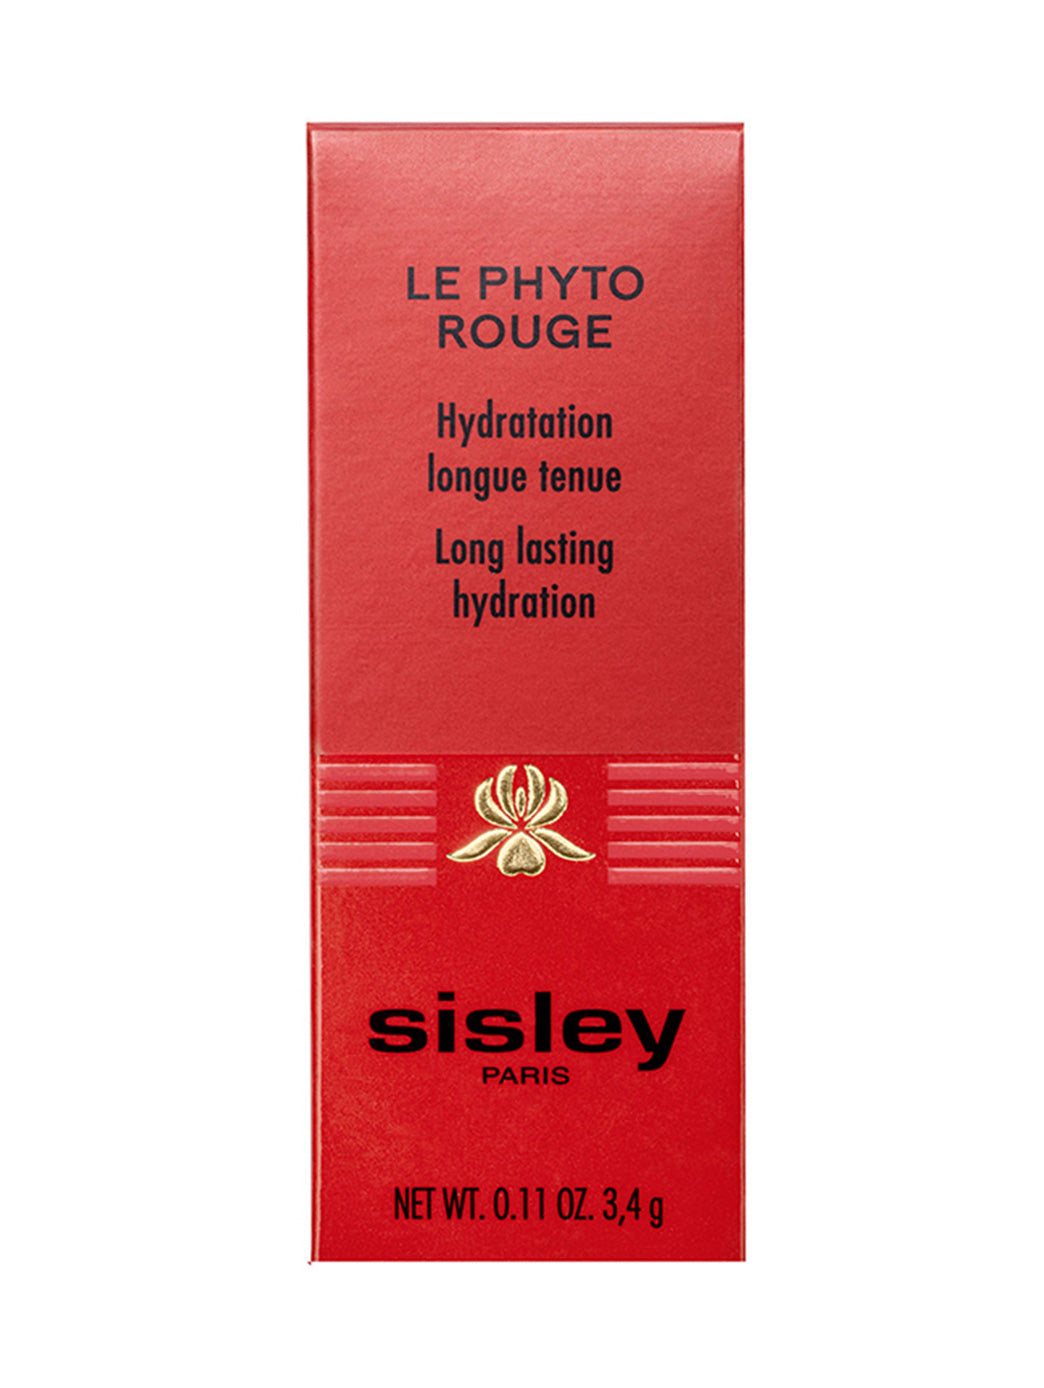 42472944205974 - Le Phyto Rouge